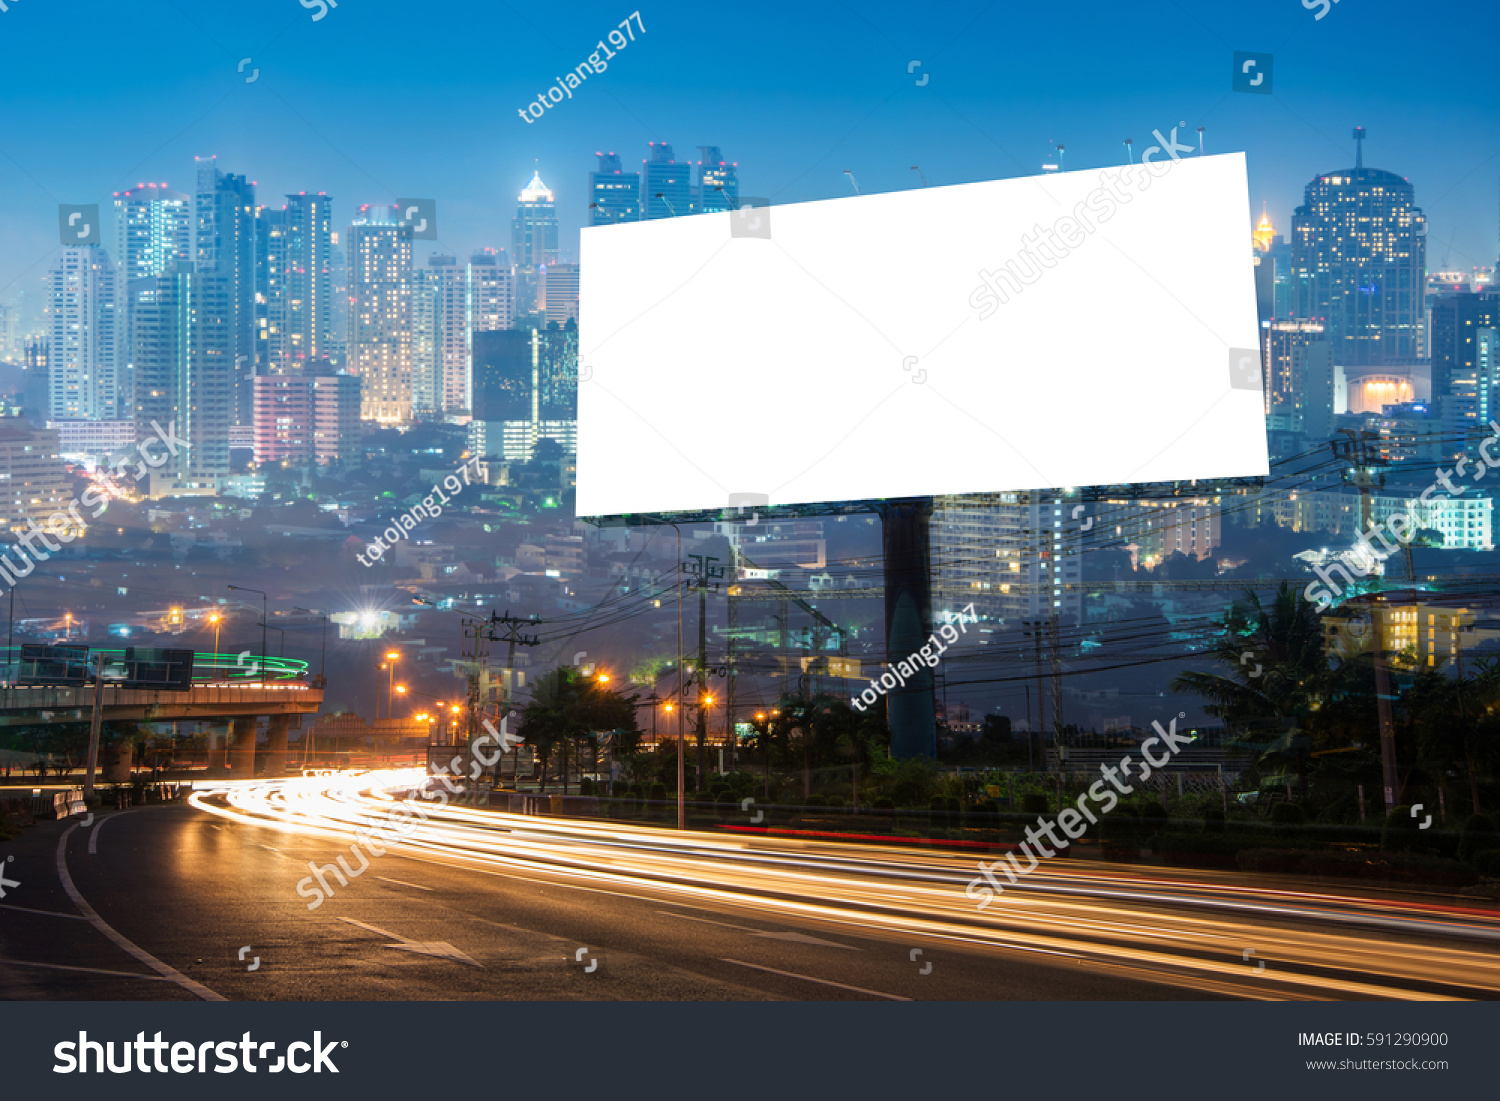 Double exposure of blank billboard for business advertisement with city background at twilight  #591290900